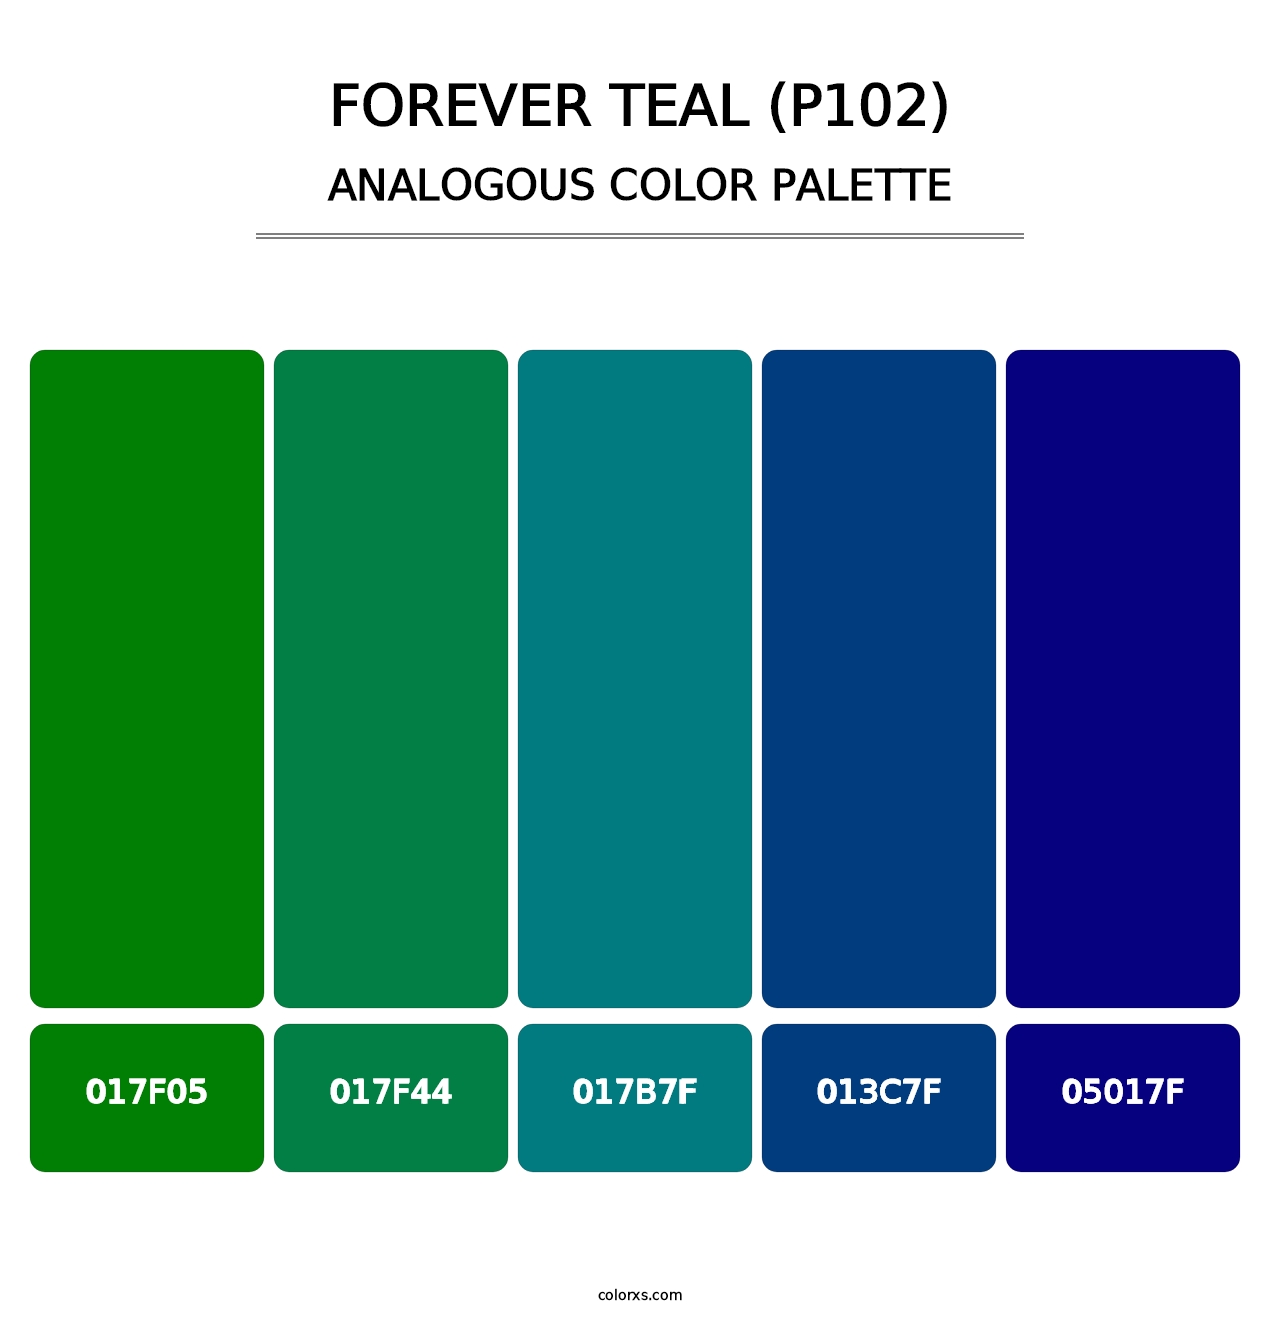 Forever Teal (P102) - Analogous Color Palette